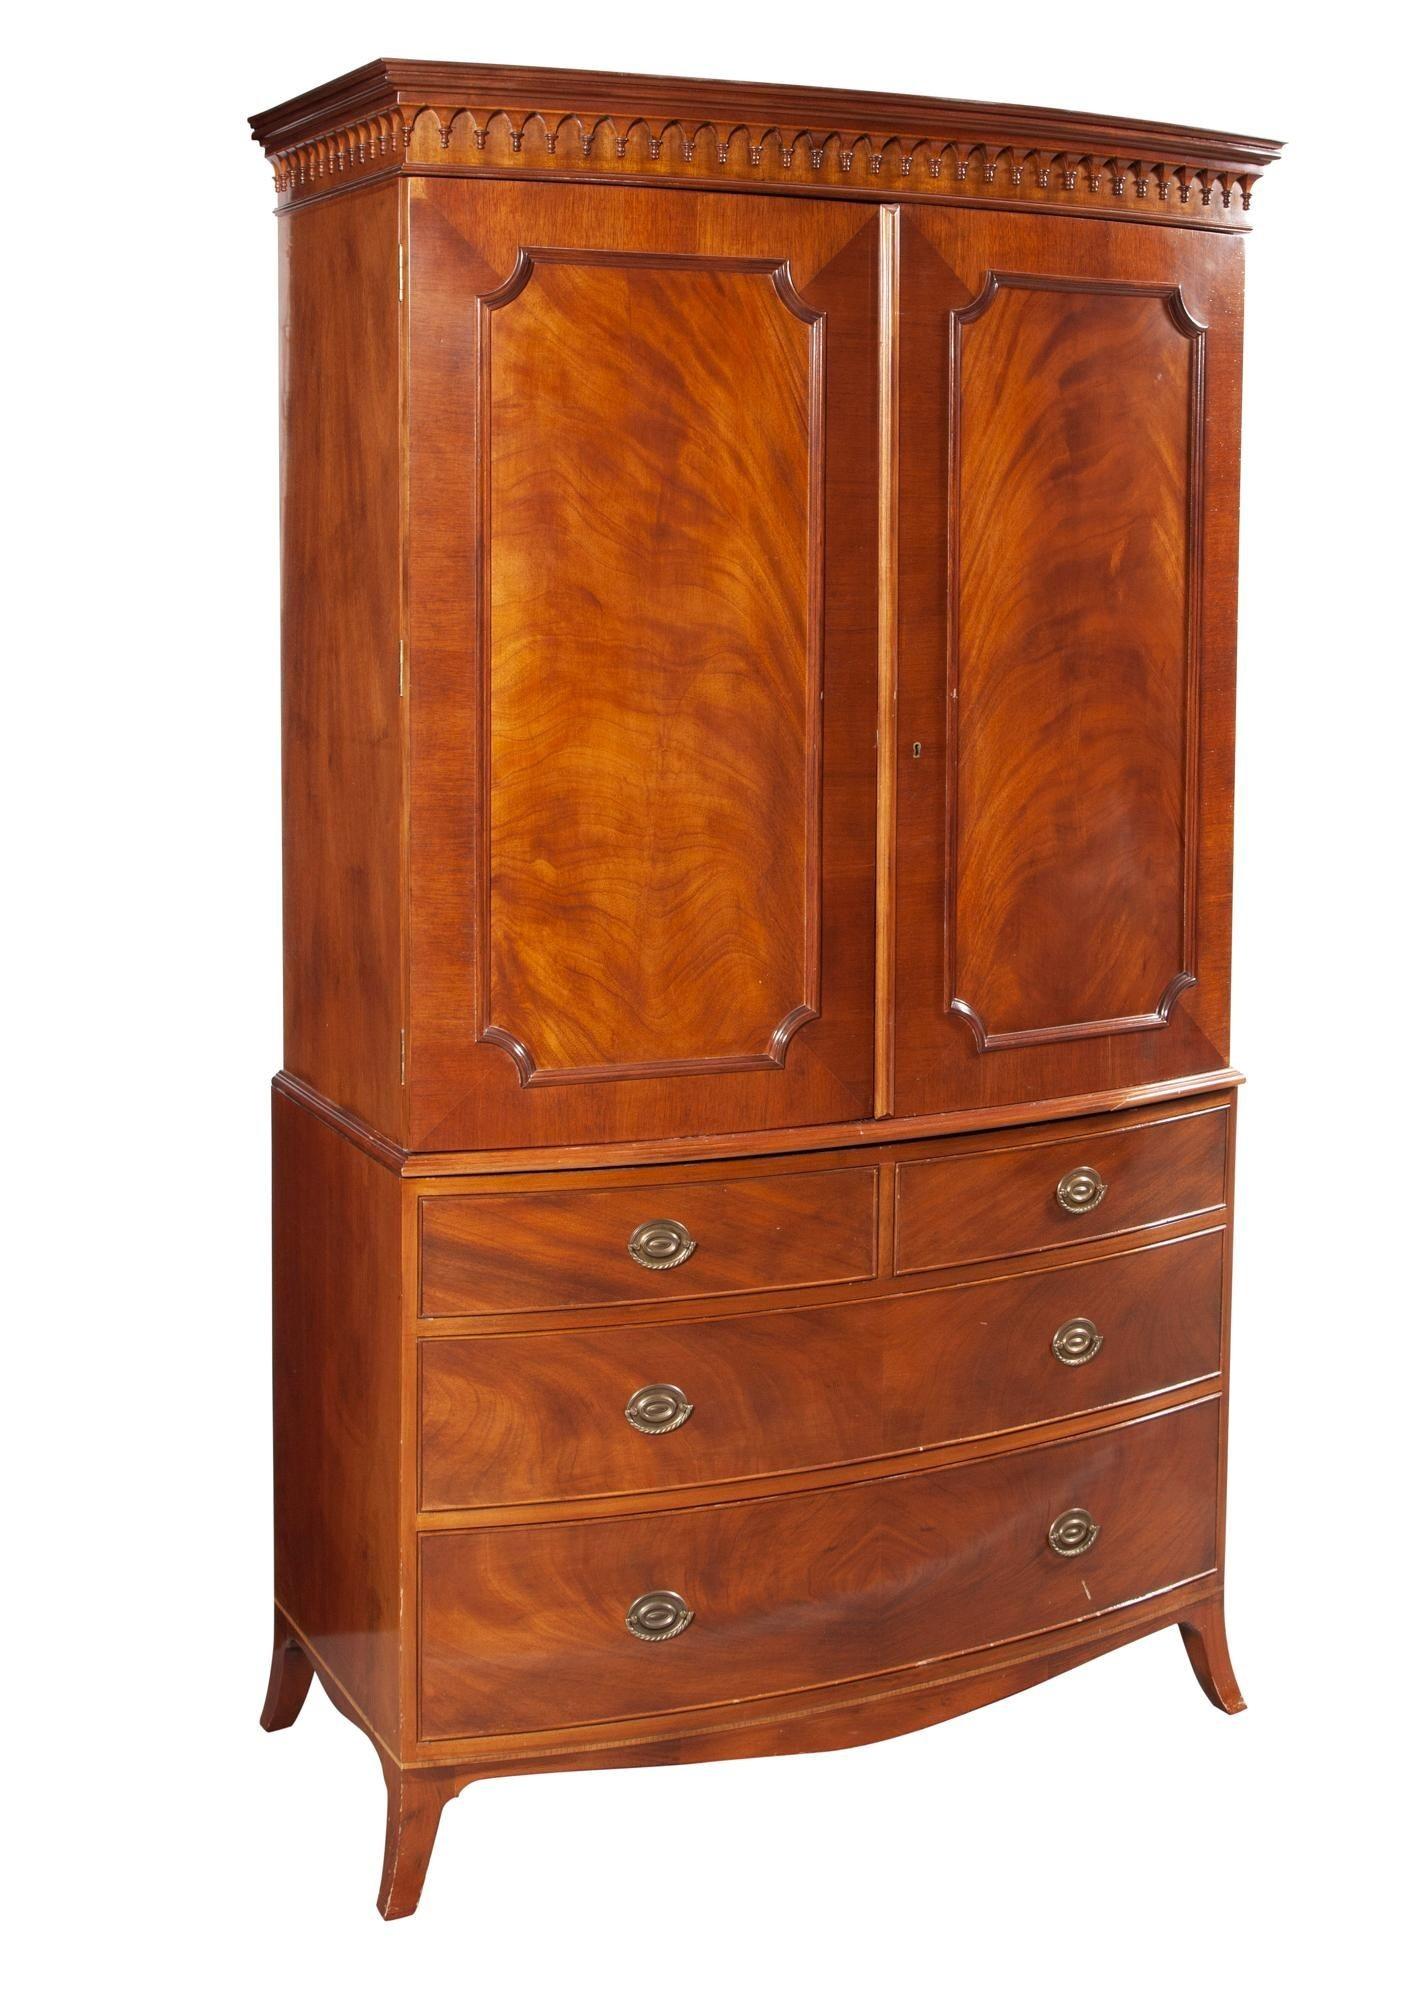 George lll Style Mahogany Armoire, Wardrobe, Linen Press, Schmieg & Kotzian
 
A stunning flame mahogany Bow Front Linen Chest or wardrobe cabinet possibly by Schmieg and Kotzian. The sprayed leas supporting an upper chest of drawers having two clean